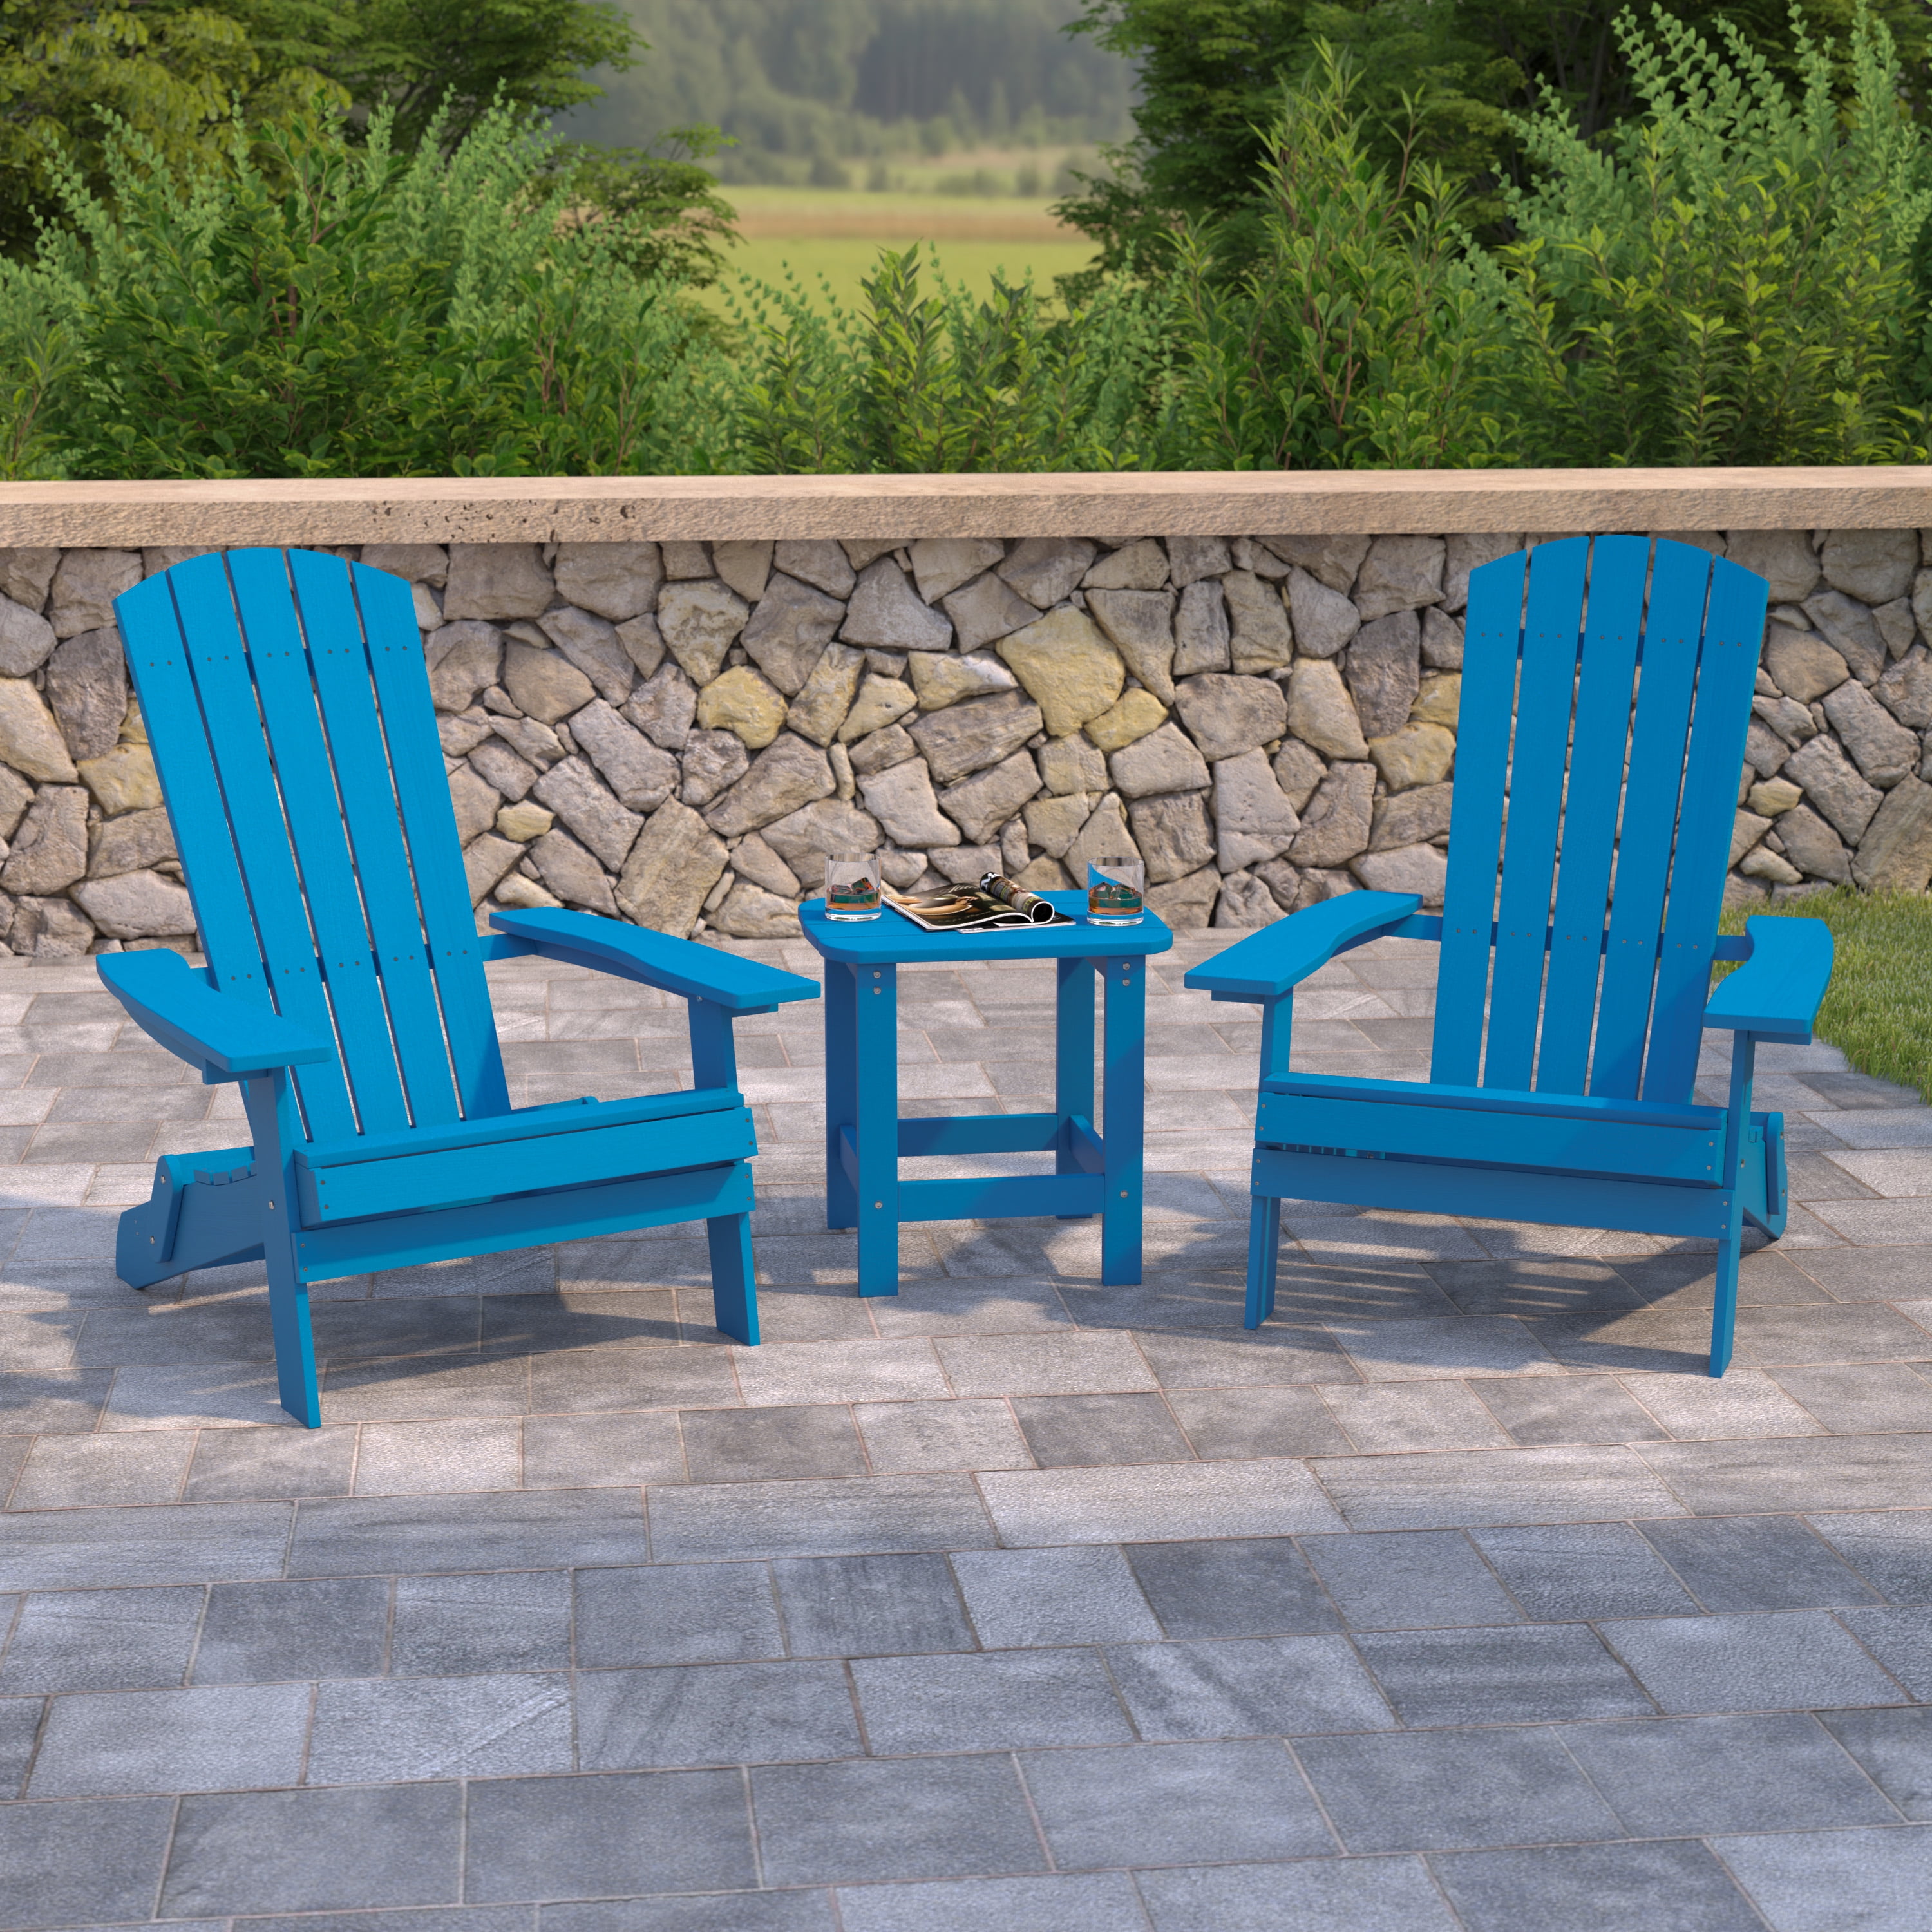 Coffee SANLUCE HDPS Adirondack Chairs Weather Resistant for Patio Garden Patio and Indoors Backyard 